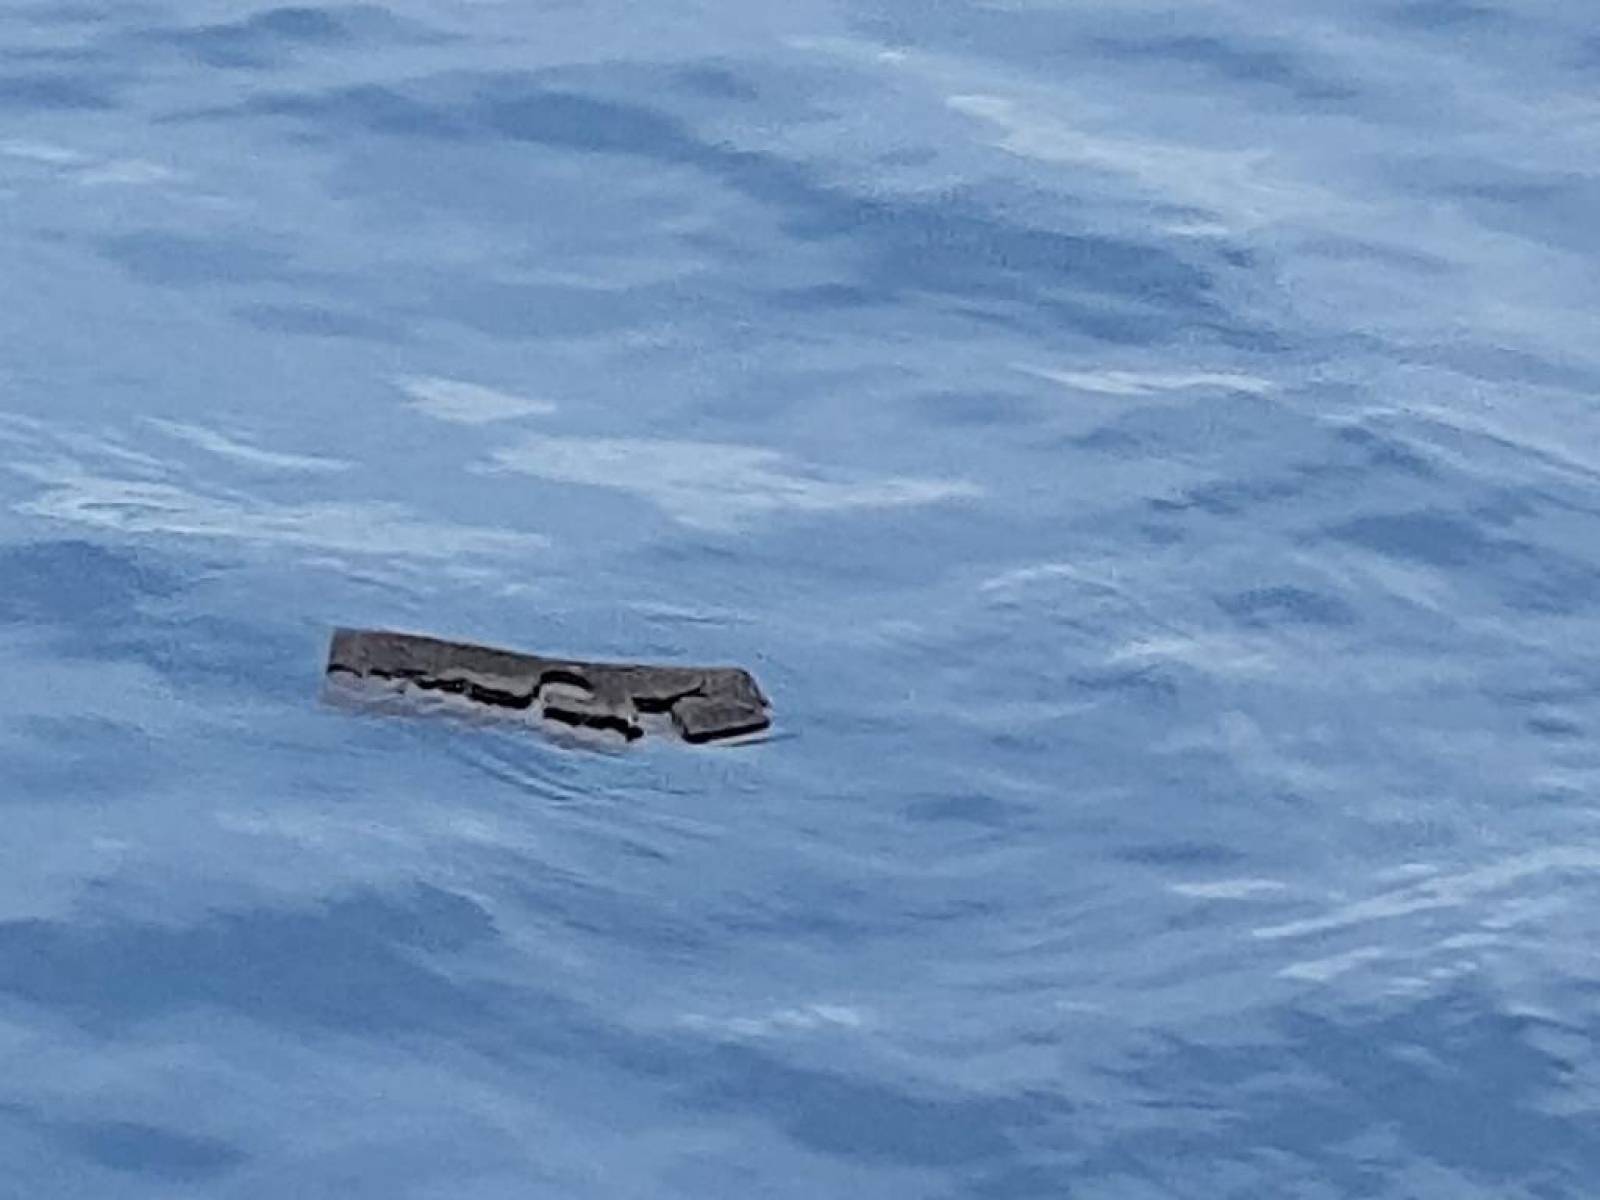 Debris believed by the Chilean Air Force to be from a Hercules C-130 military cargo plane that crashed this week and went missing, is seen in the Drake Passage or Sea of Hoces